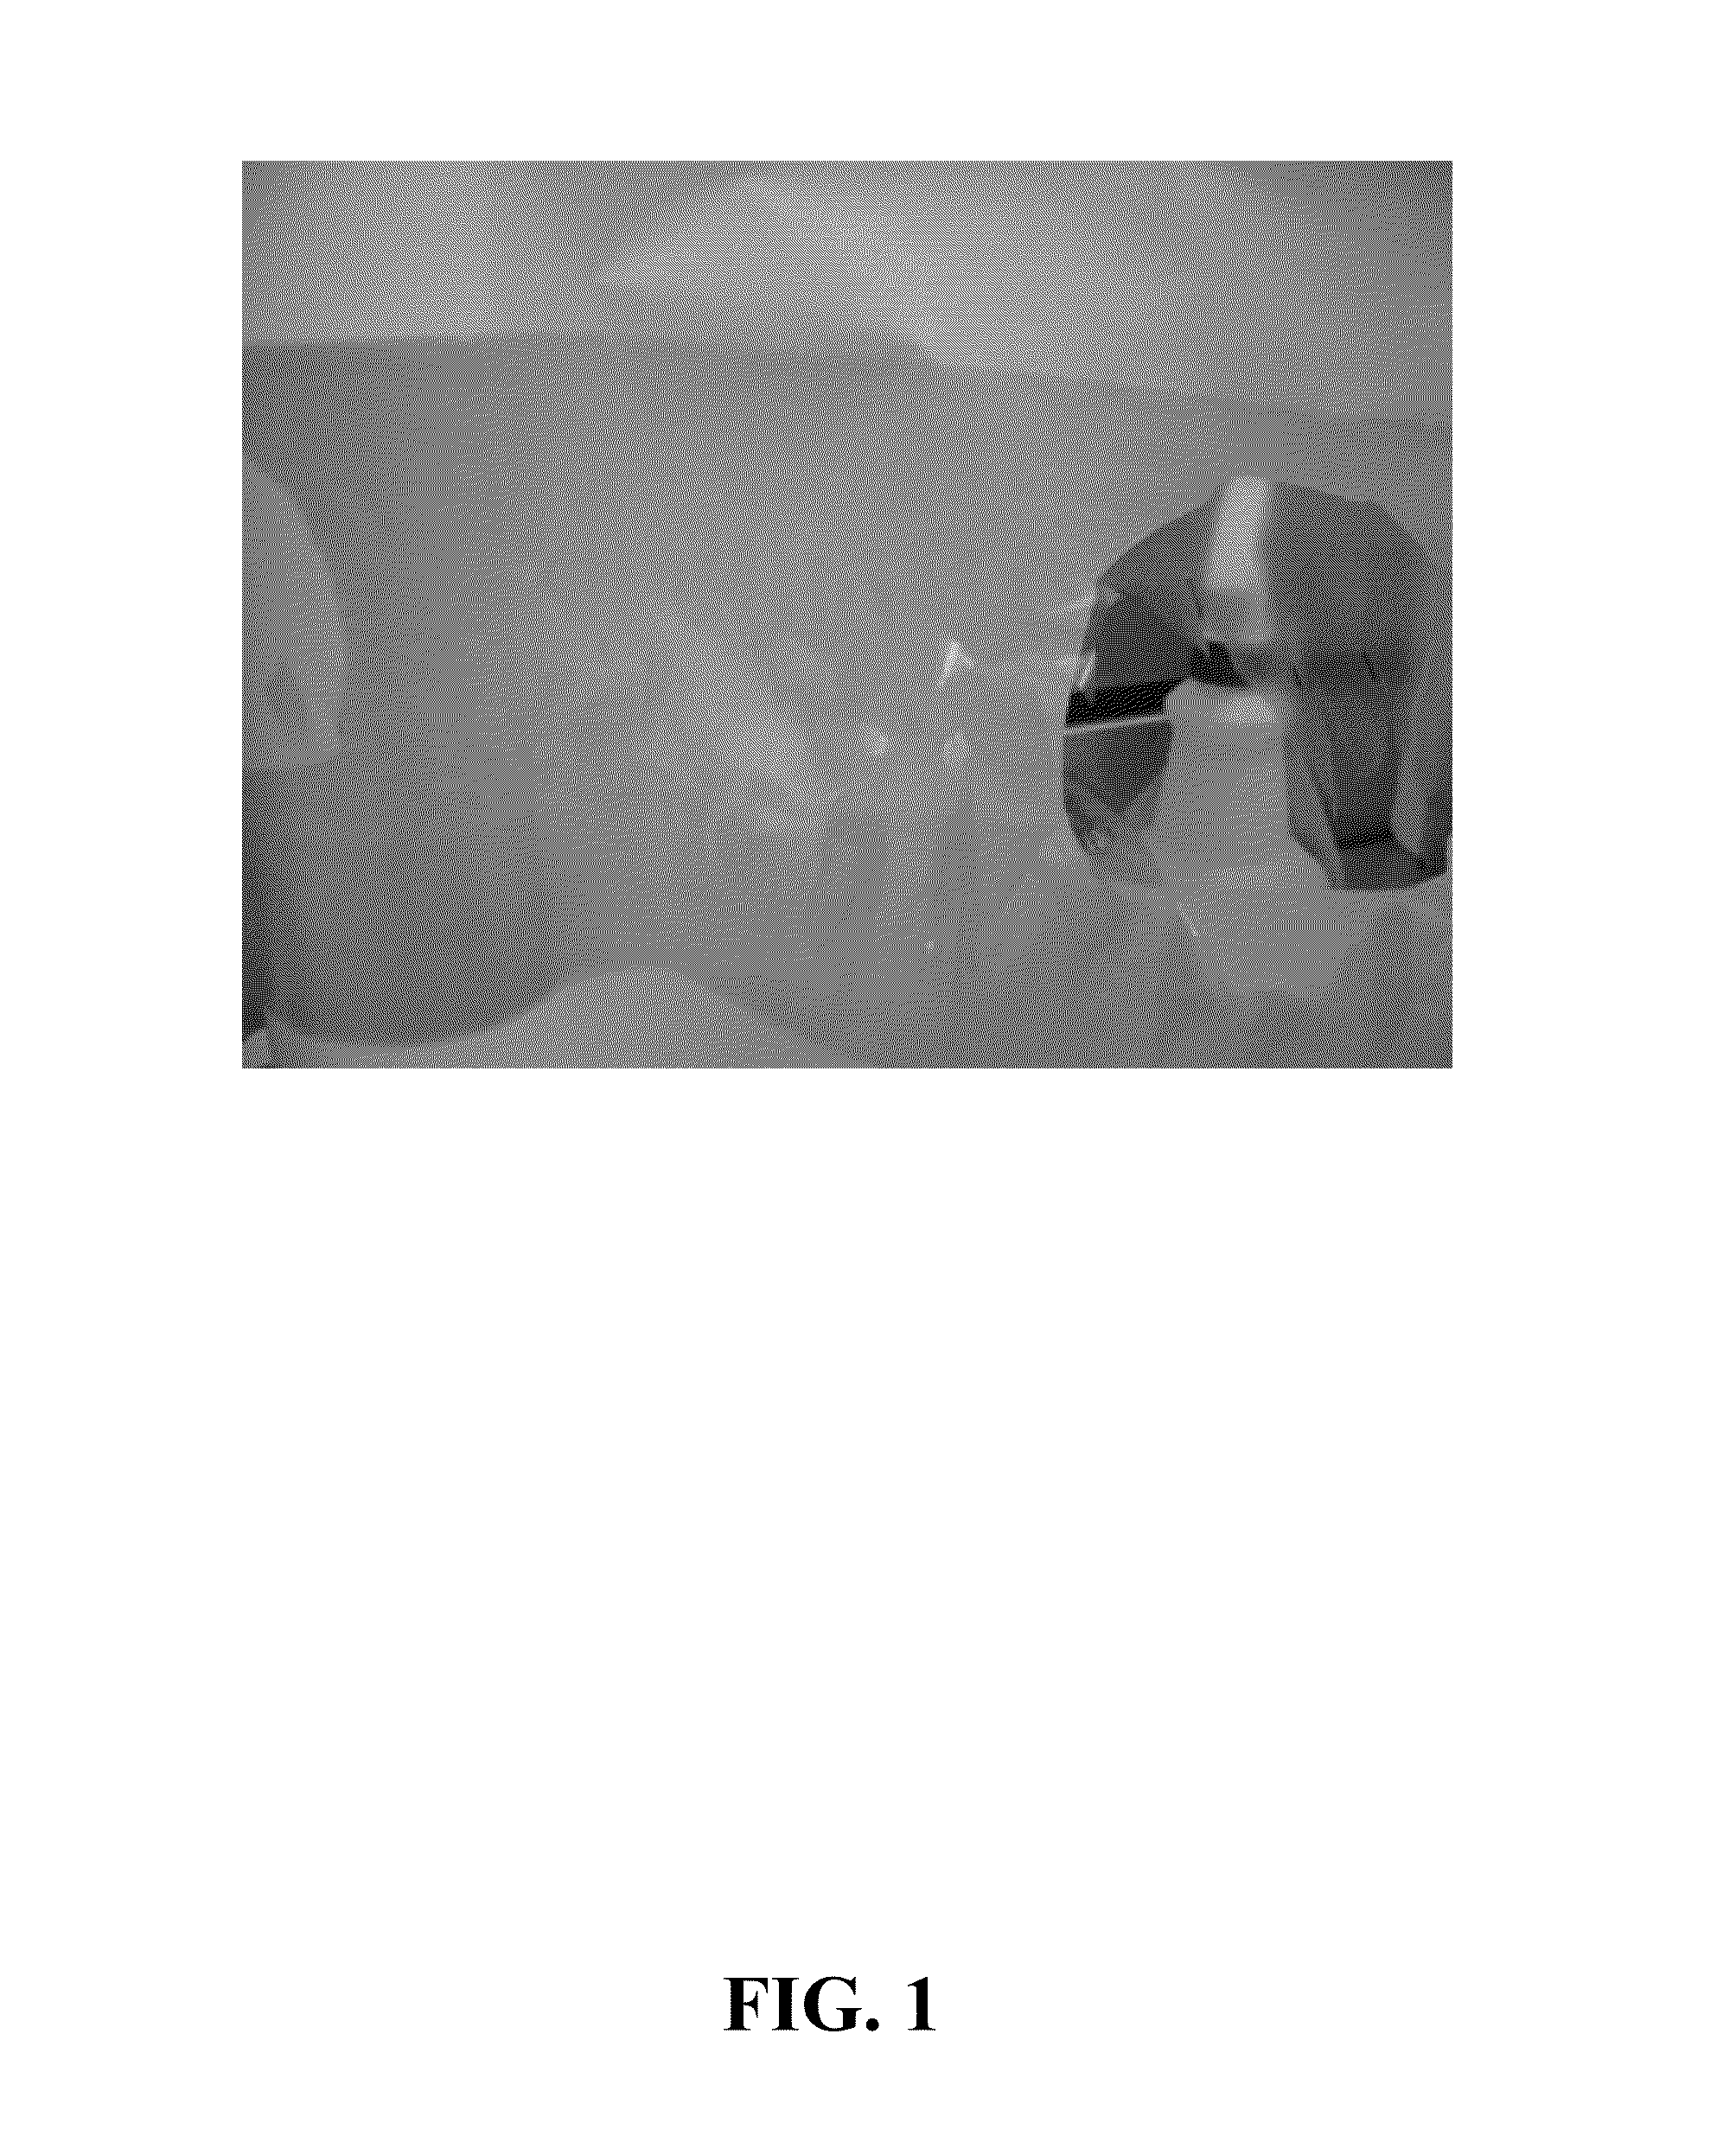 Method for making sulfonated block copolymers, method for making membranes from such block copolymers and membrane structures